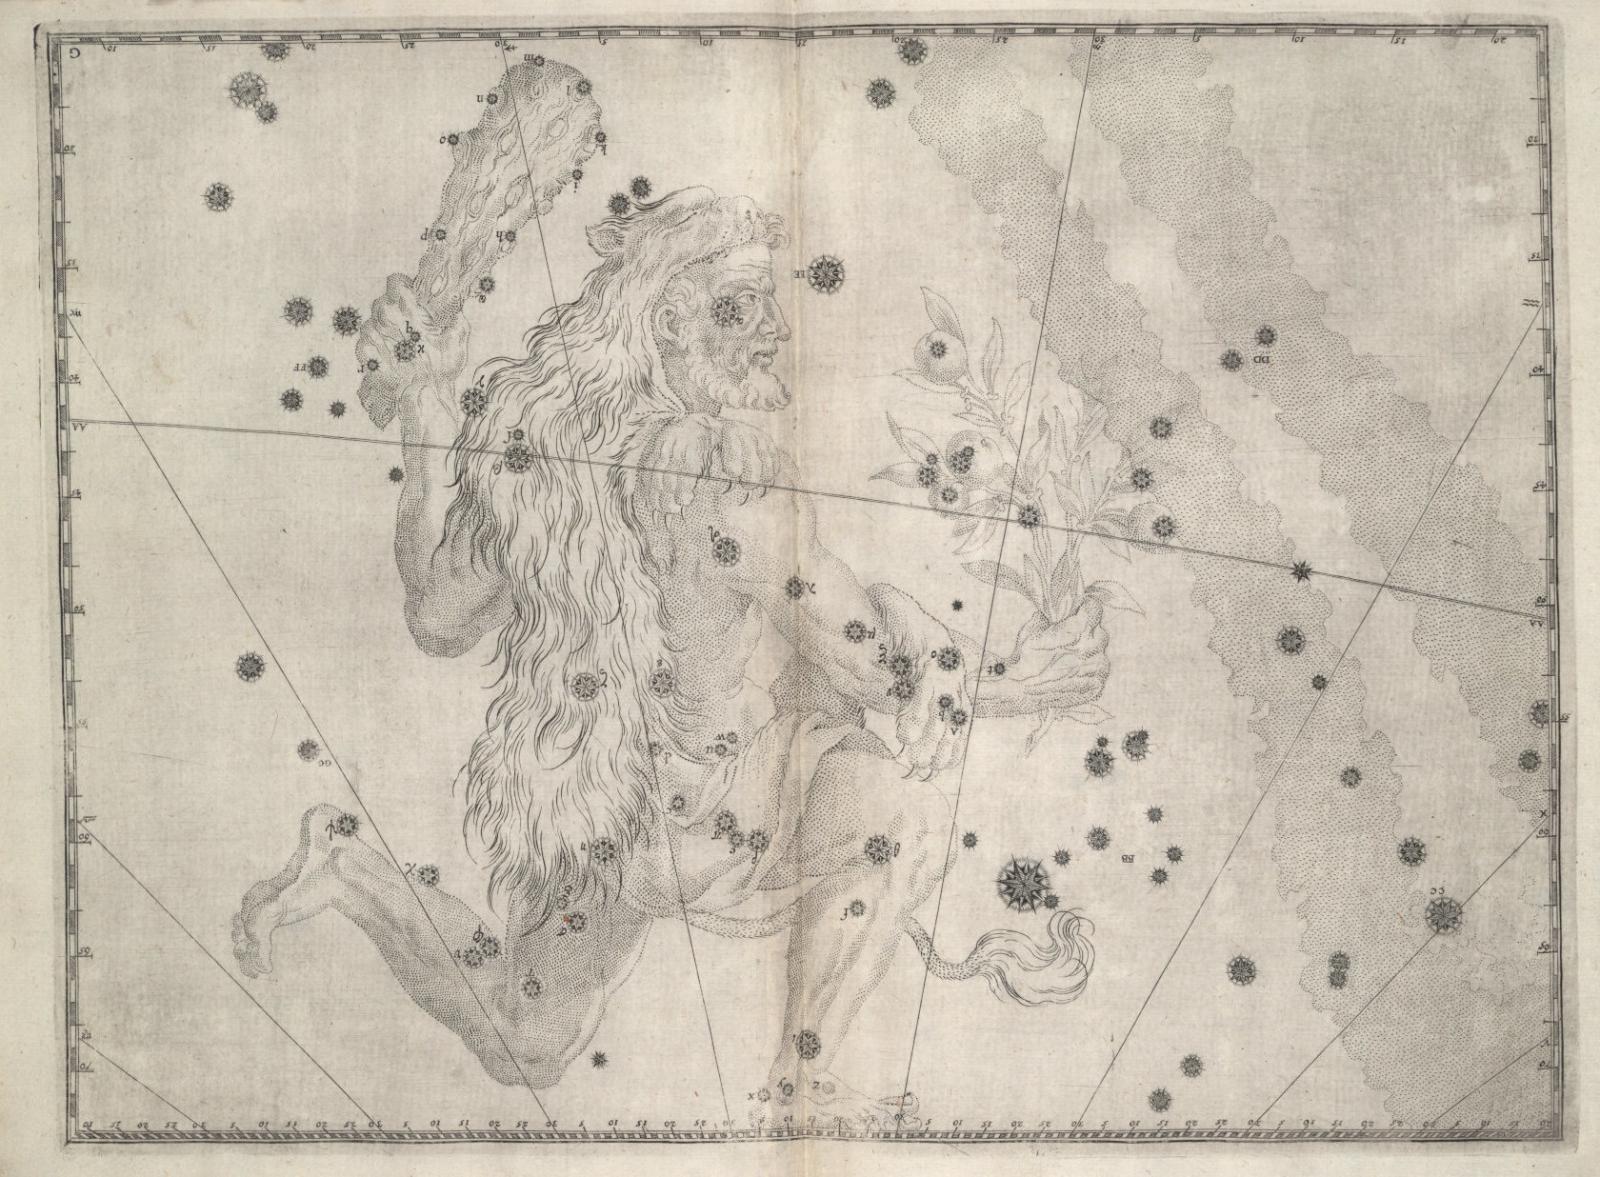 Printed chart with stars of different sizes and an illustration of a person wearing a lion skin and holding a club in one hand and a plant sprig in the other